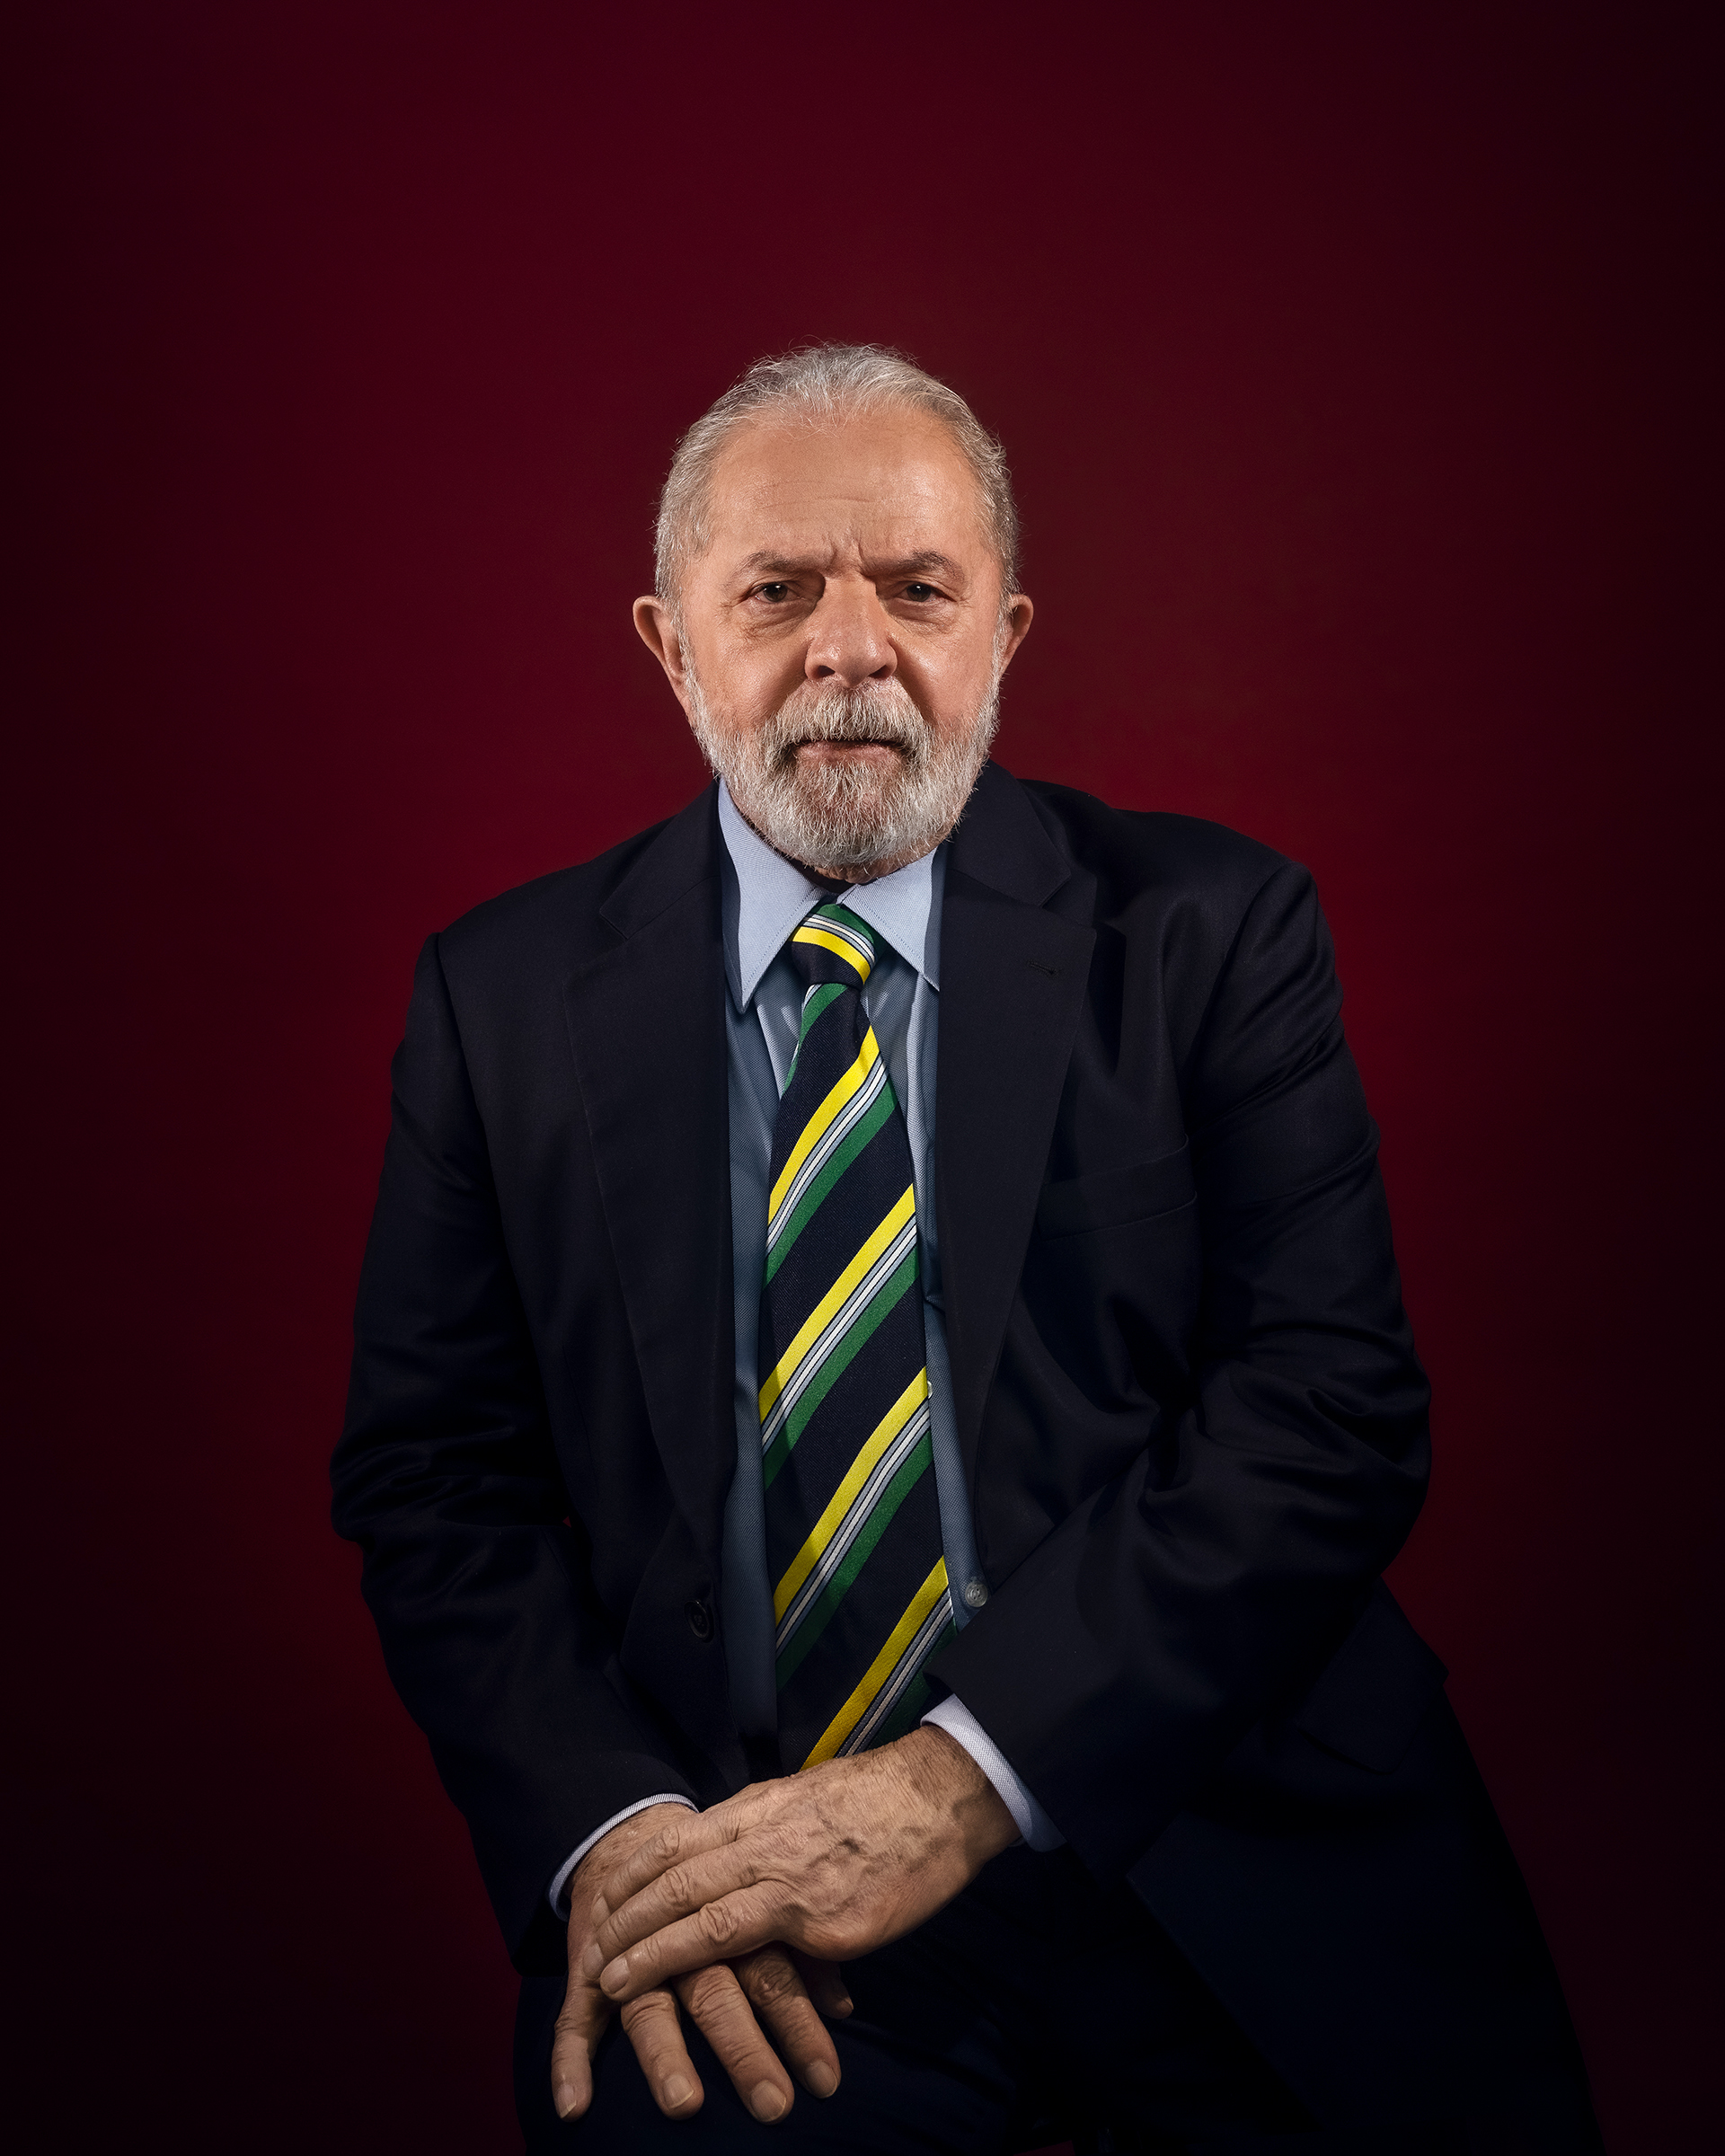 Lula, former Brazilian President and 2022 presidential candidate, photographed in São Paulo on March 23. (Luisa Dörr for TIME)